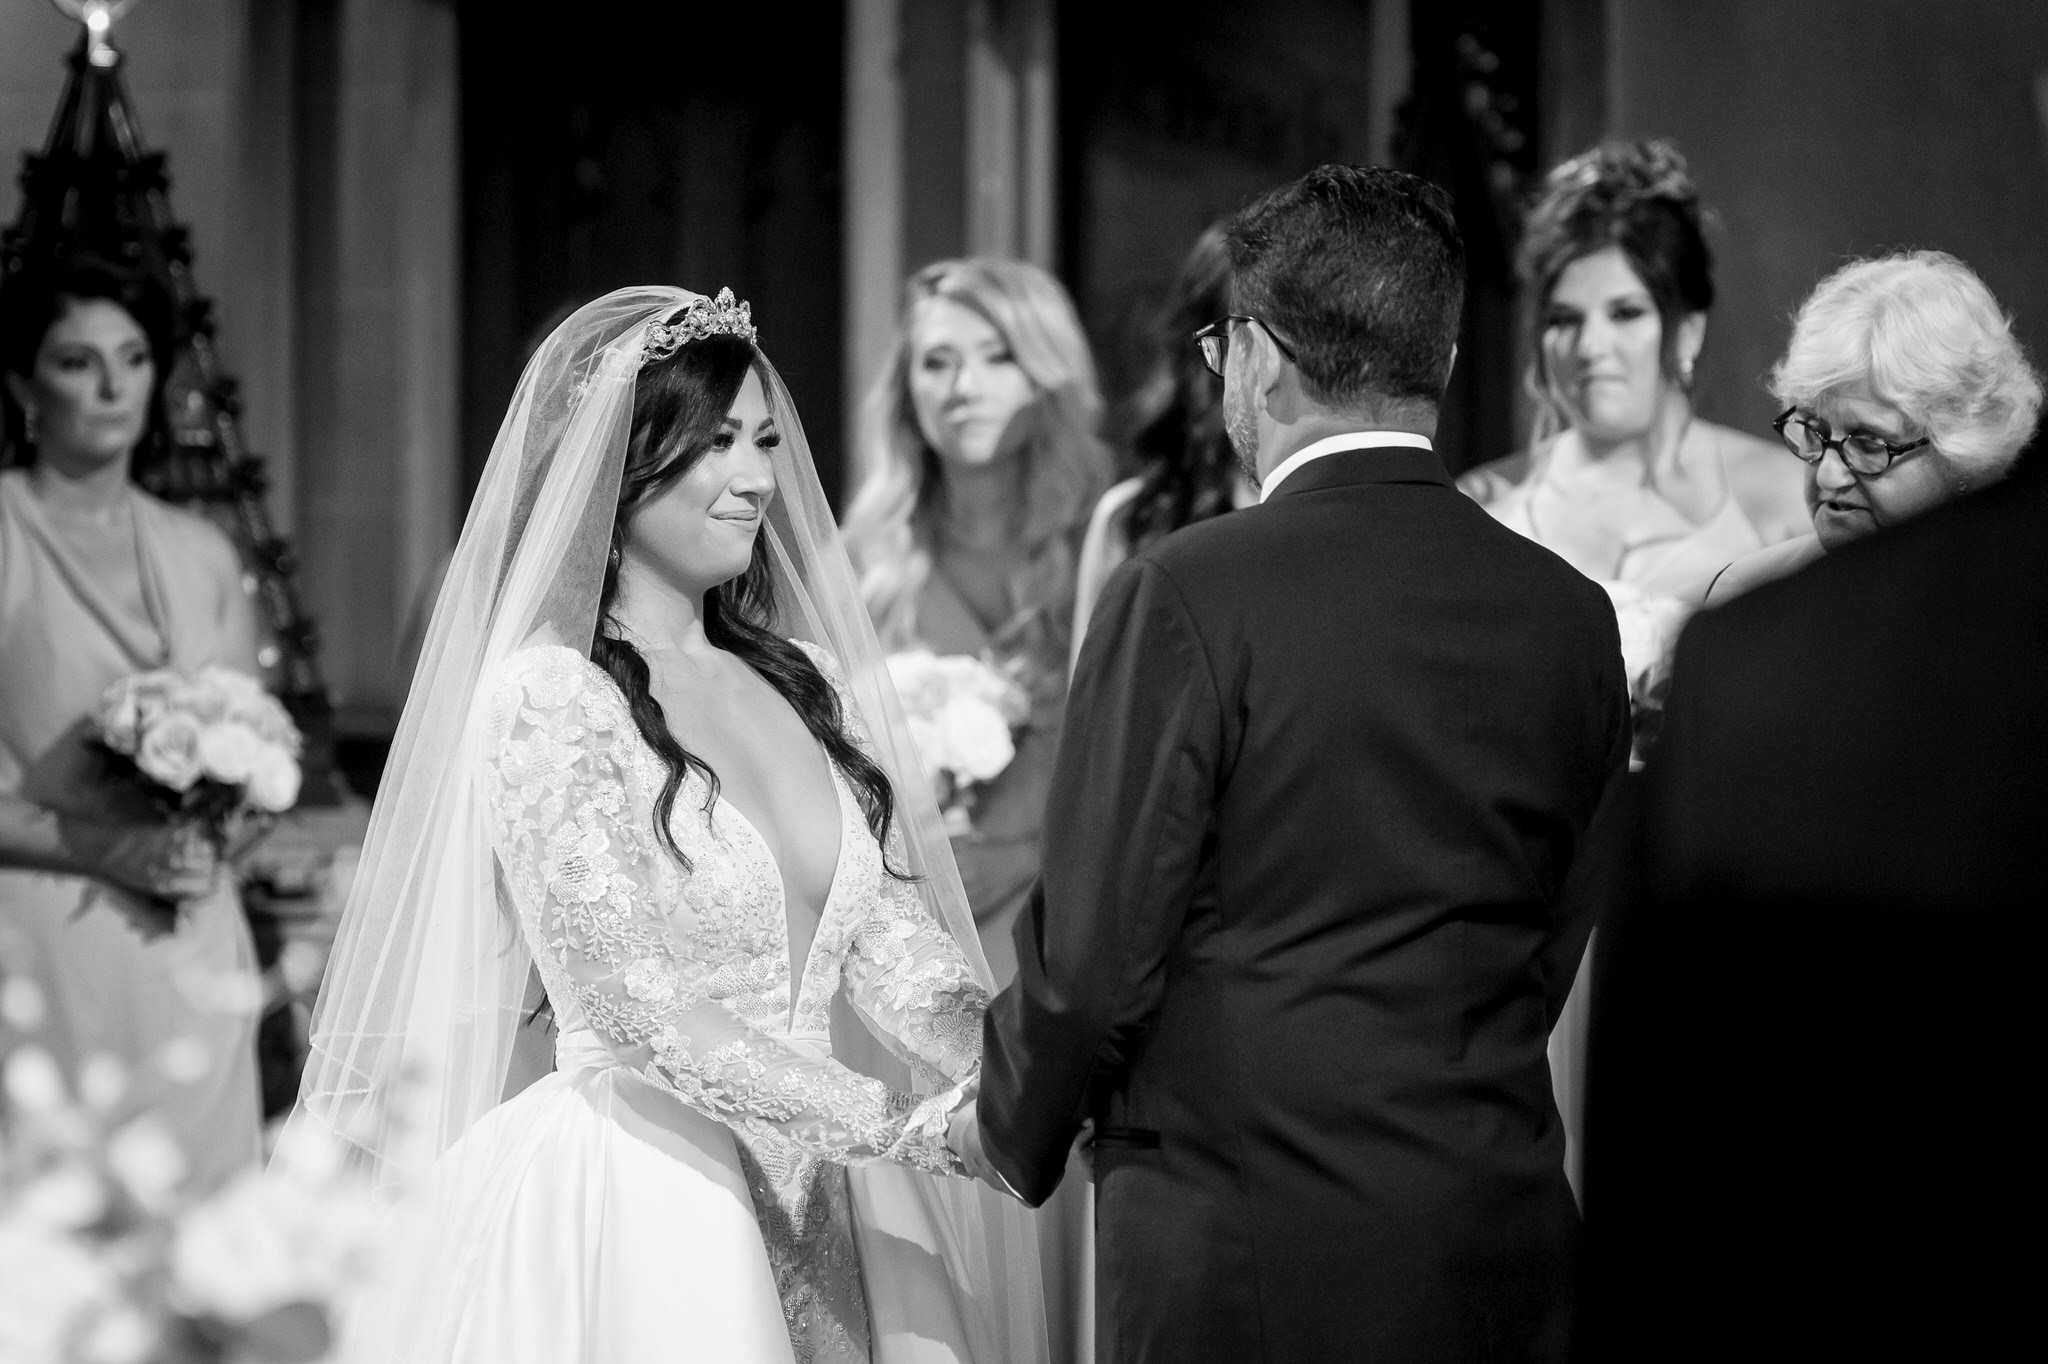 A bride and groom exchange rings at the altar at their Fort Street Presbyterian Church Detroit wedding.